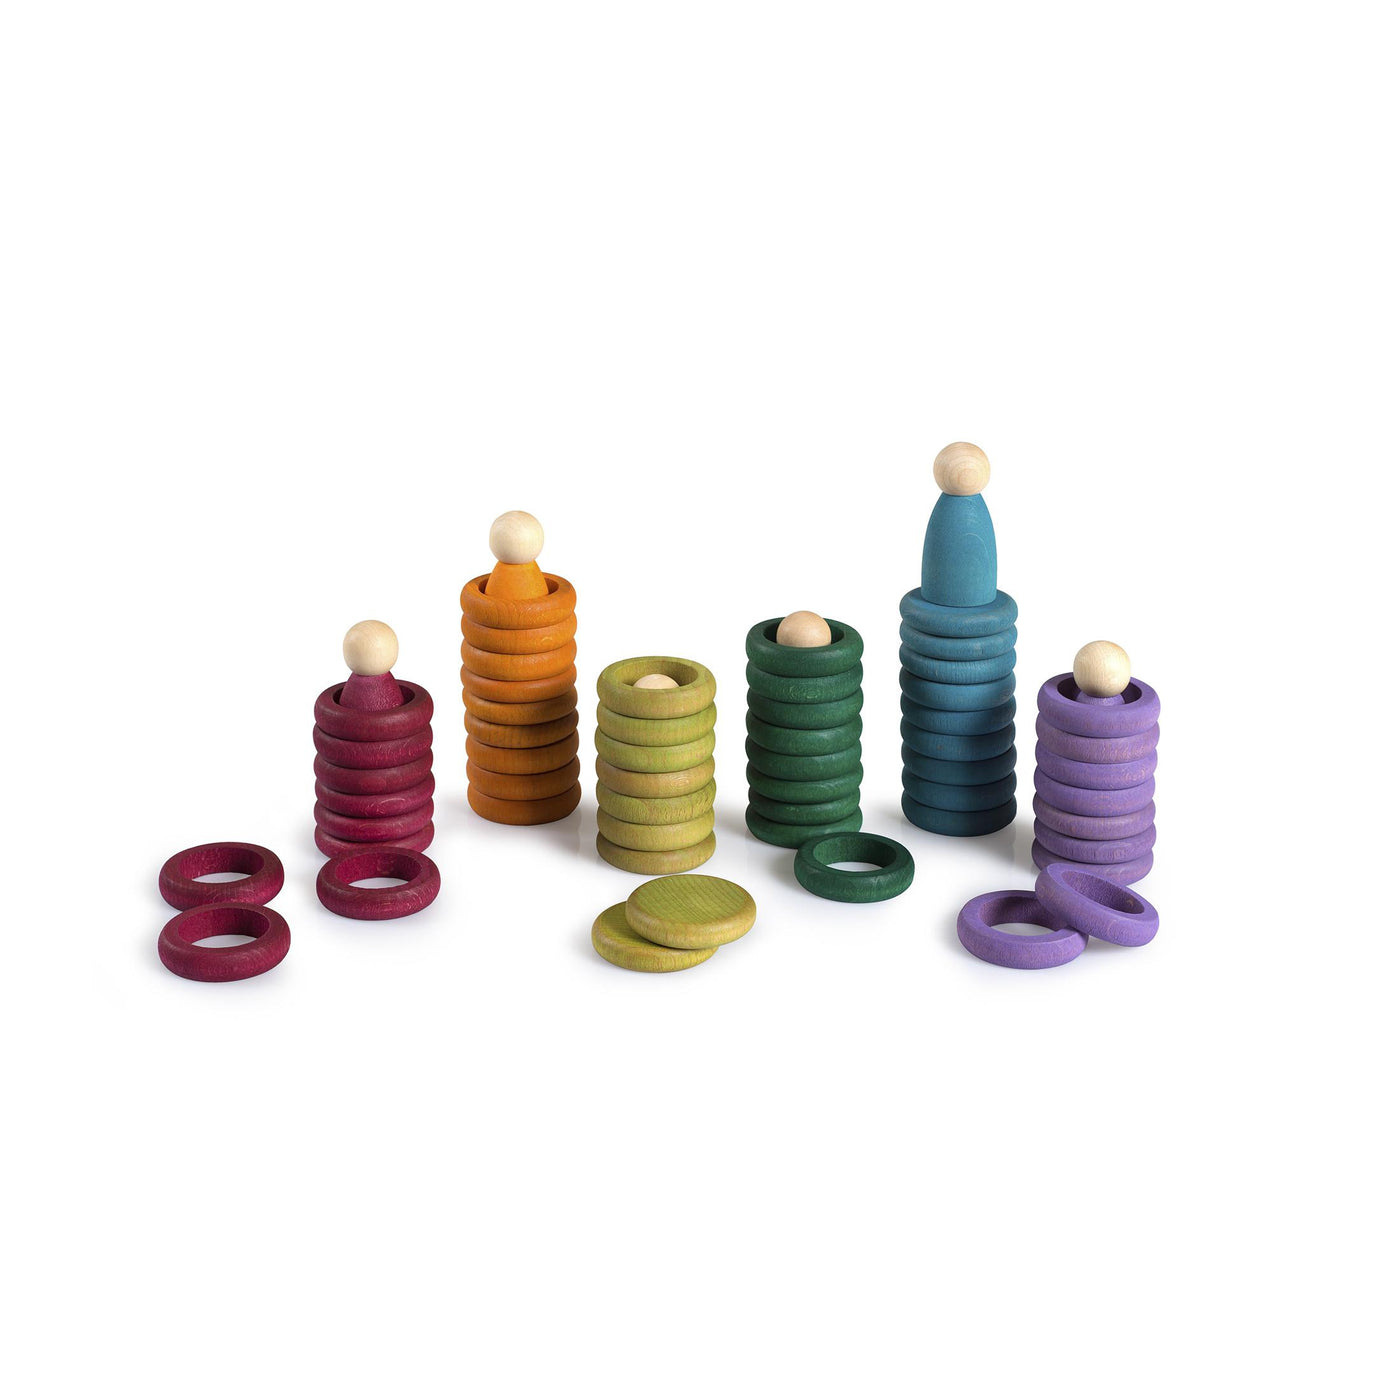 Nins, Rings & Coins Natural Secondary Coloured Wooden Loose Parts